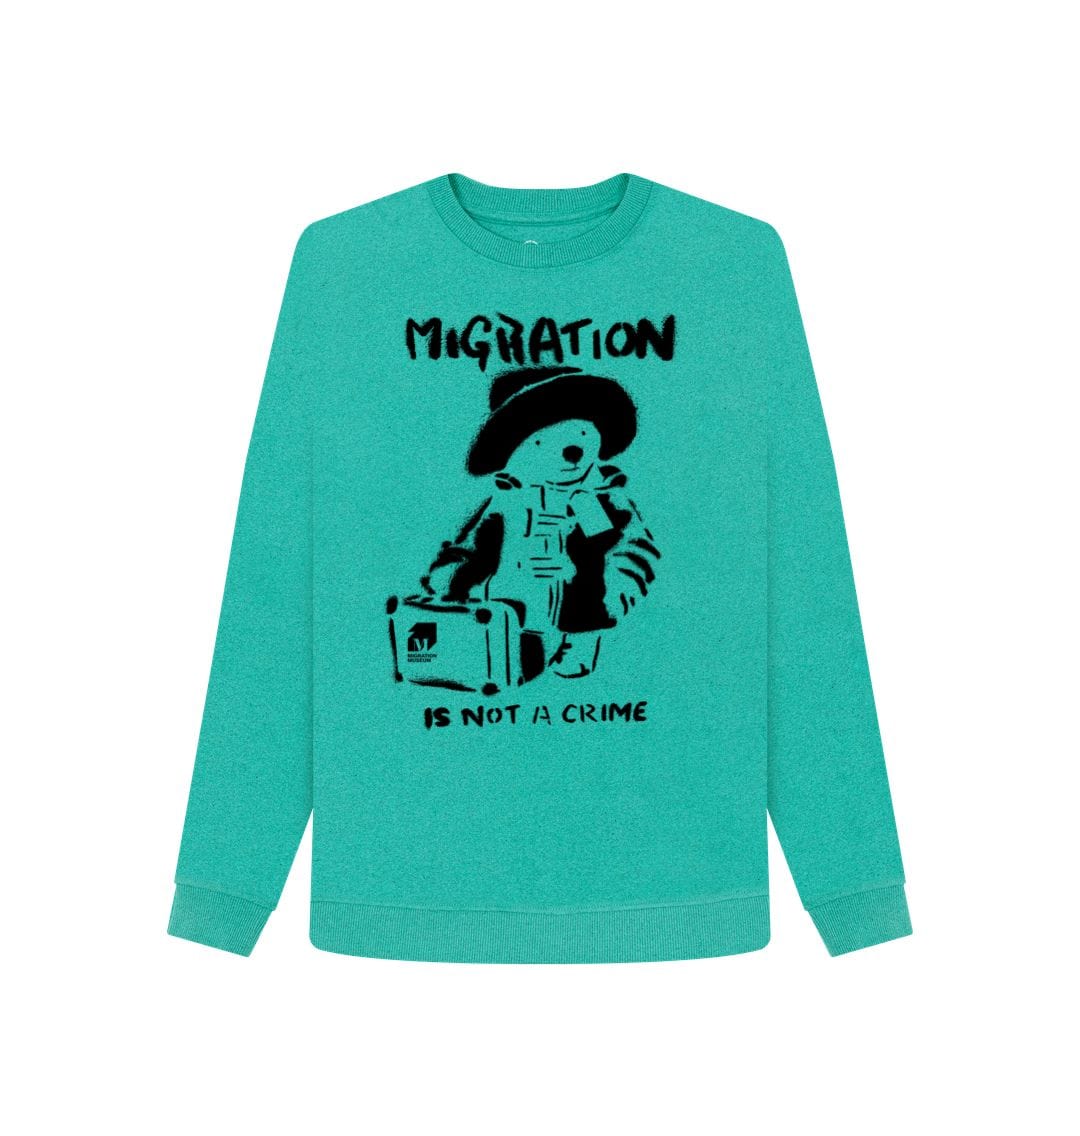 Seagrass Green Migration is Not a Crime Women's Remill\u00ae Organic Cotton Sweater